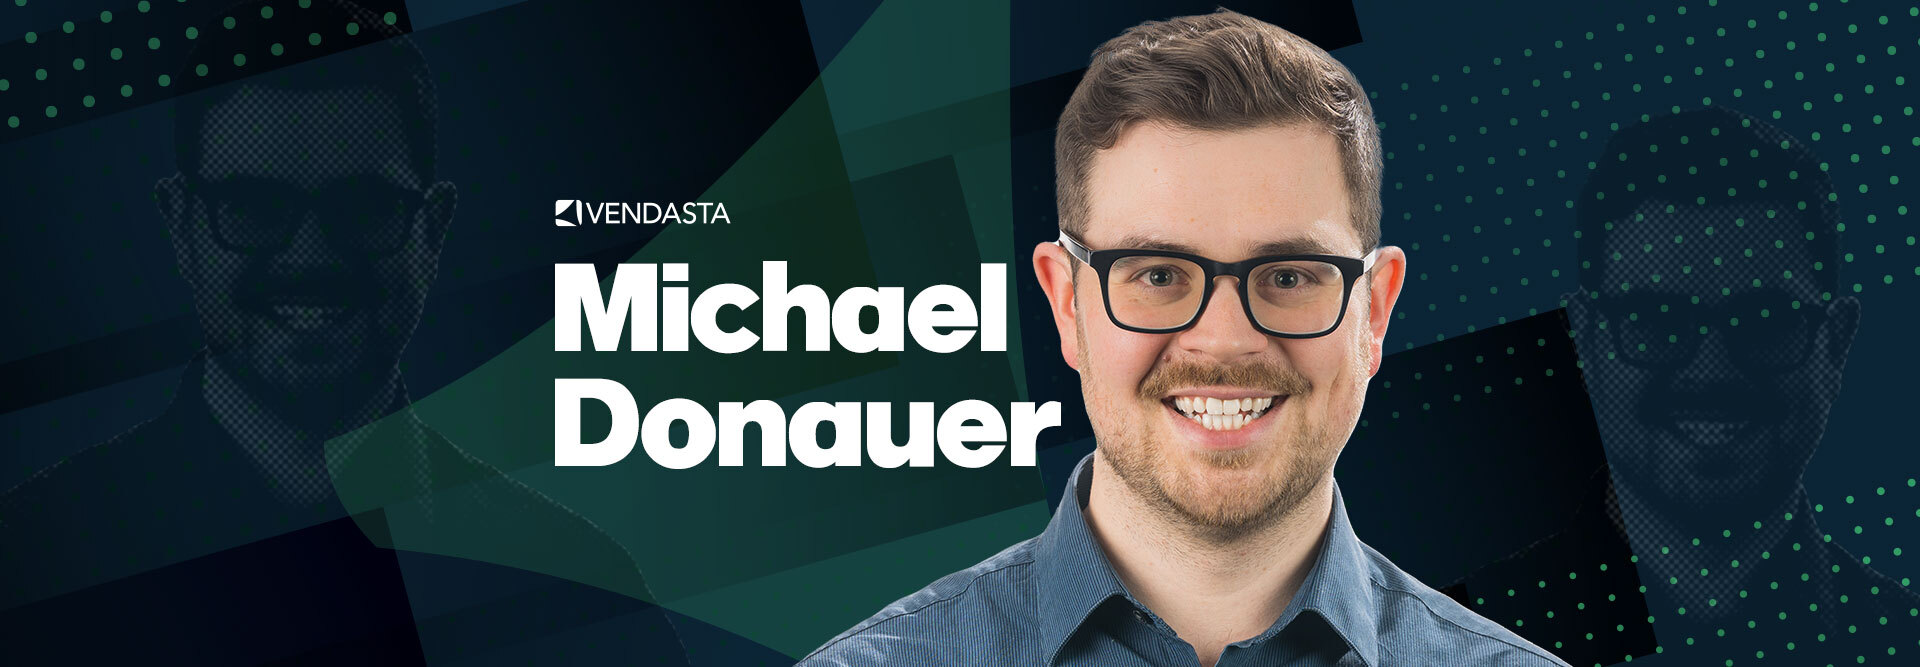 Michael Donauer, a partner development manager at Vendasta, shares tips on building a winning agency account management strategy.